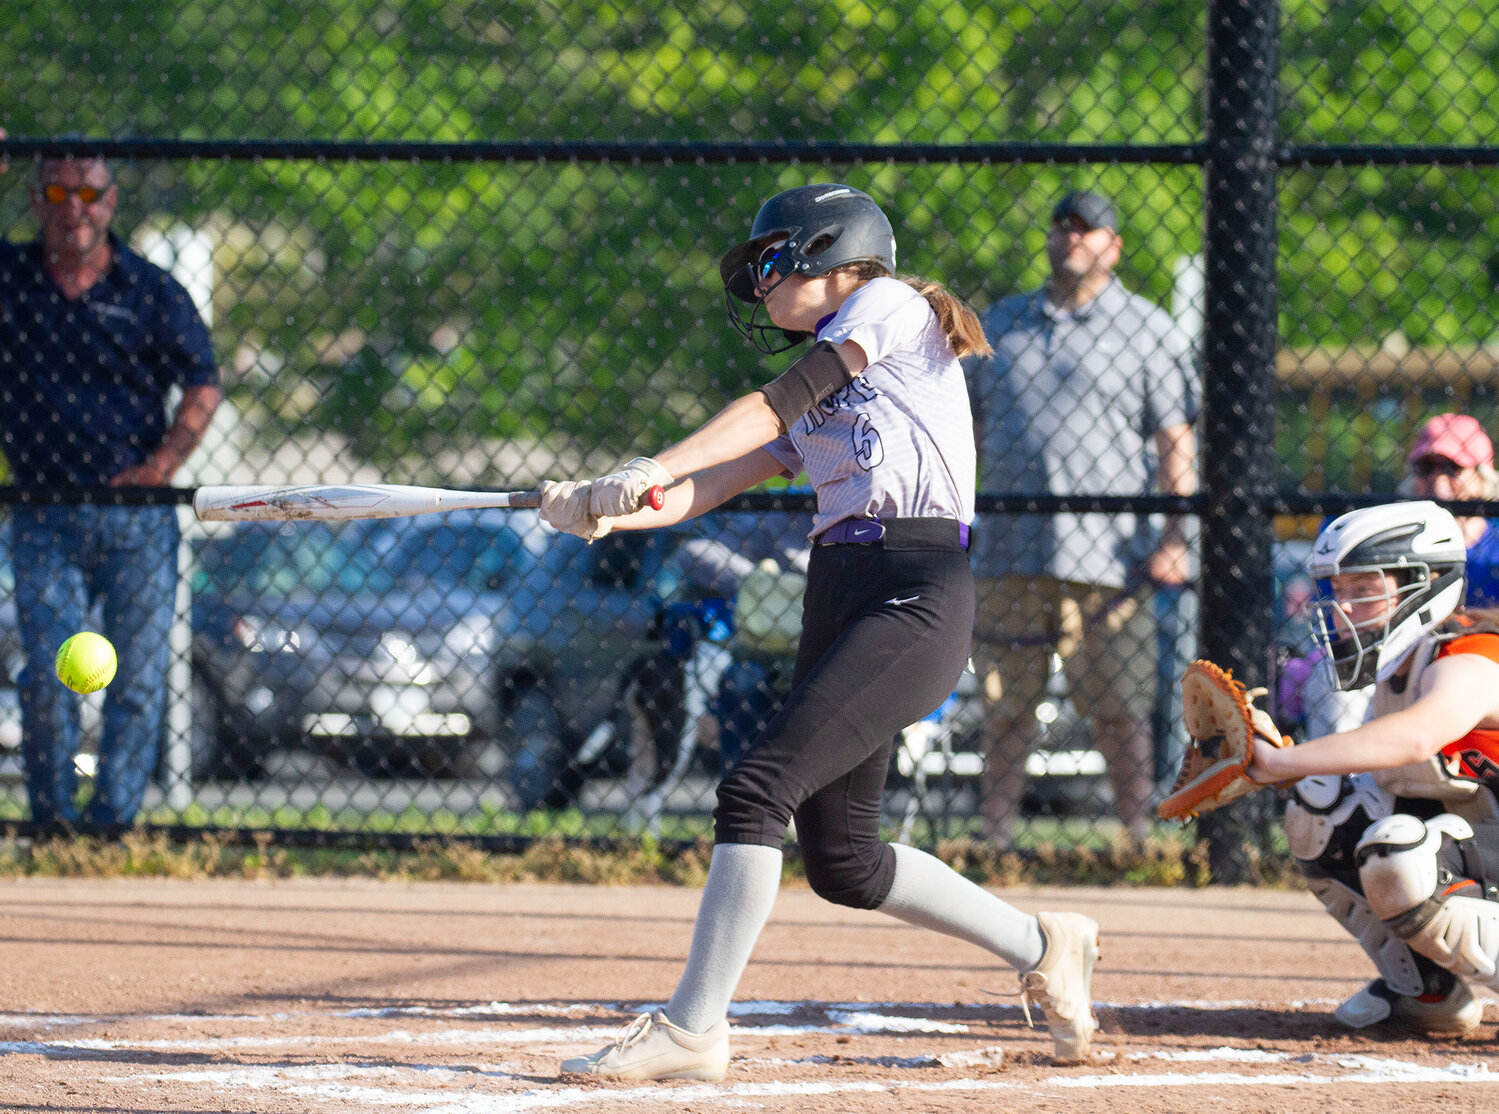 Sydney Crowell smacks a hit during the game. The third baseman was 1 for 3 with a double, an RBI and 2 runs scored.